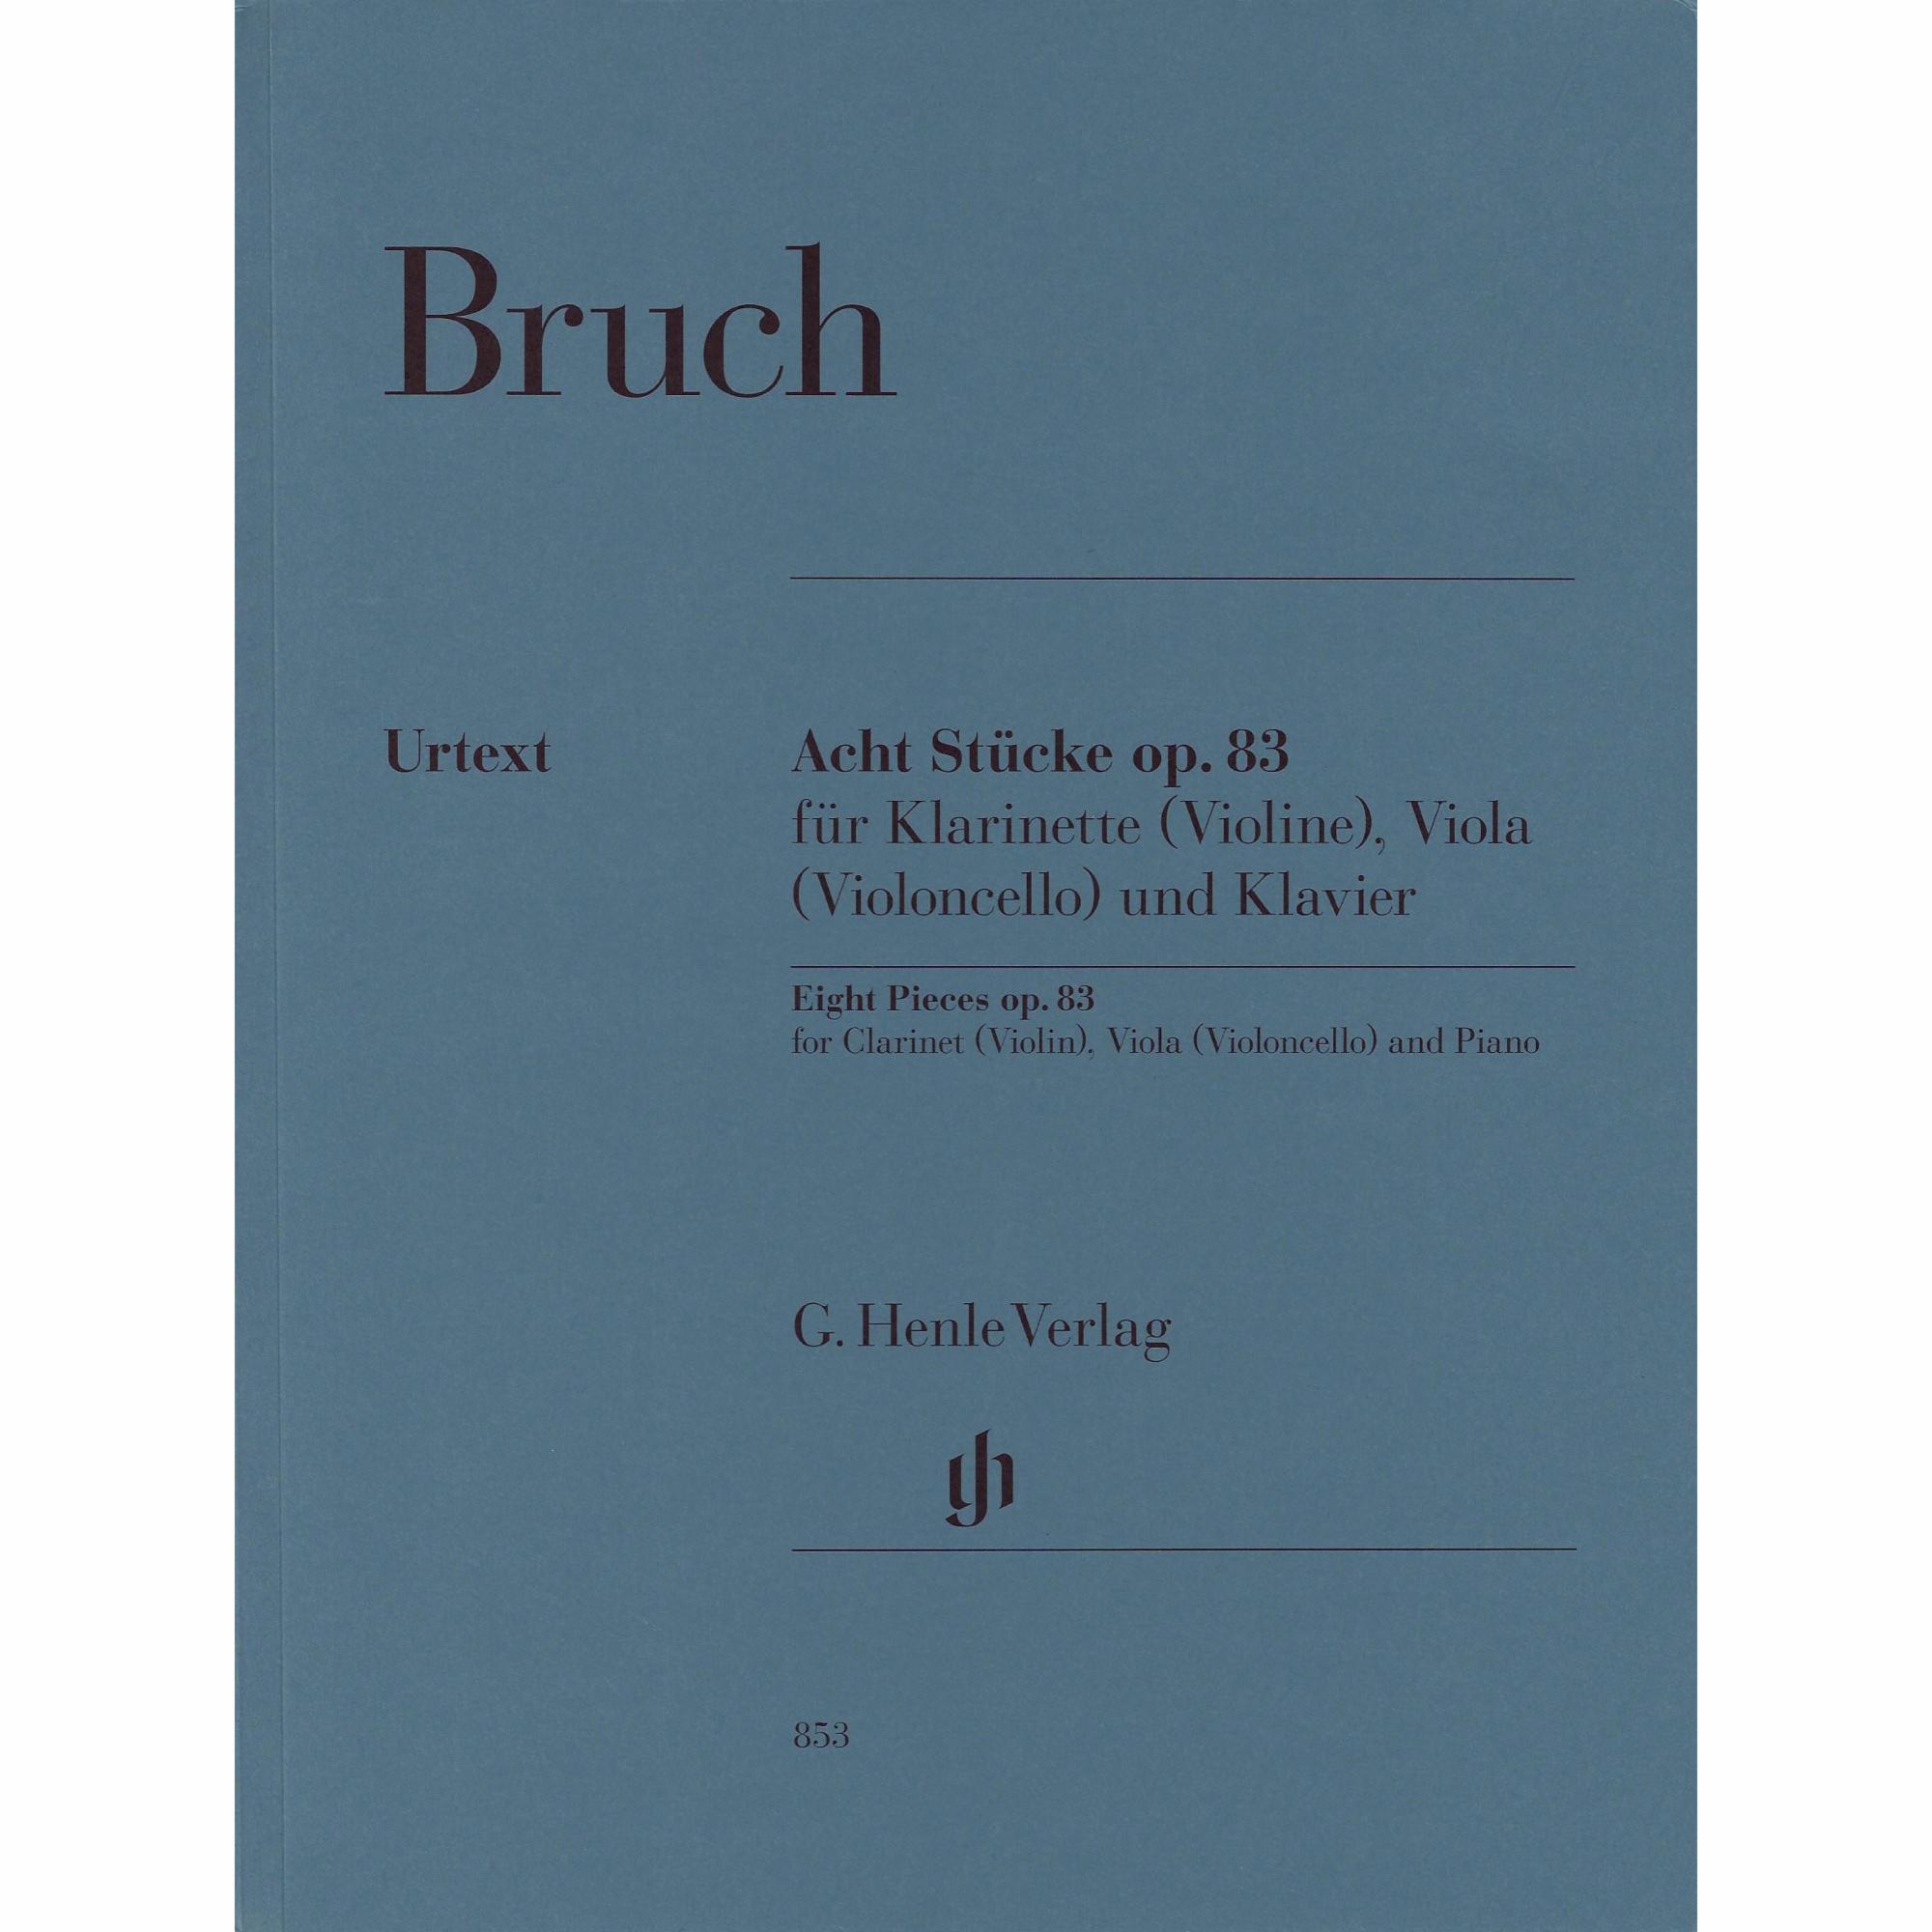 Bruch -- Eight Pieces Op. 83 for Clarinet, Viola, and Piano